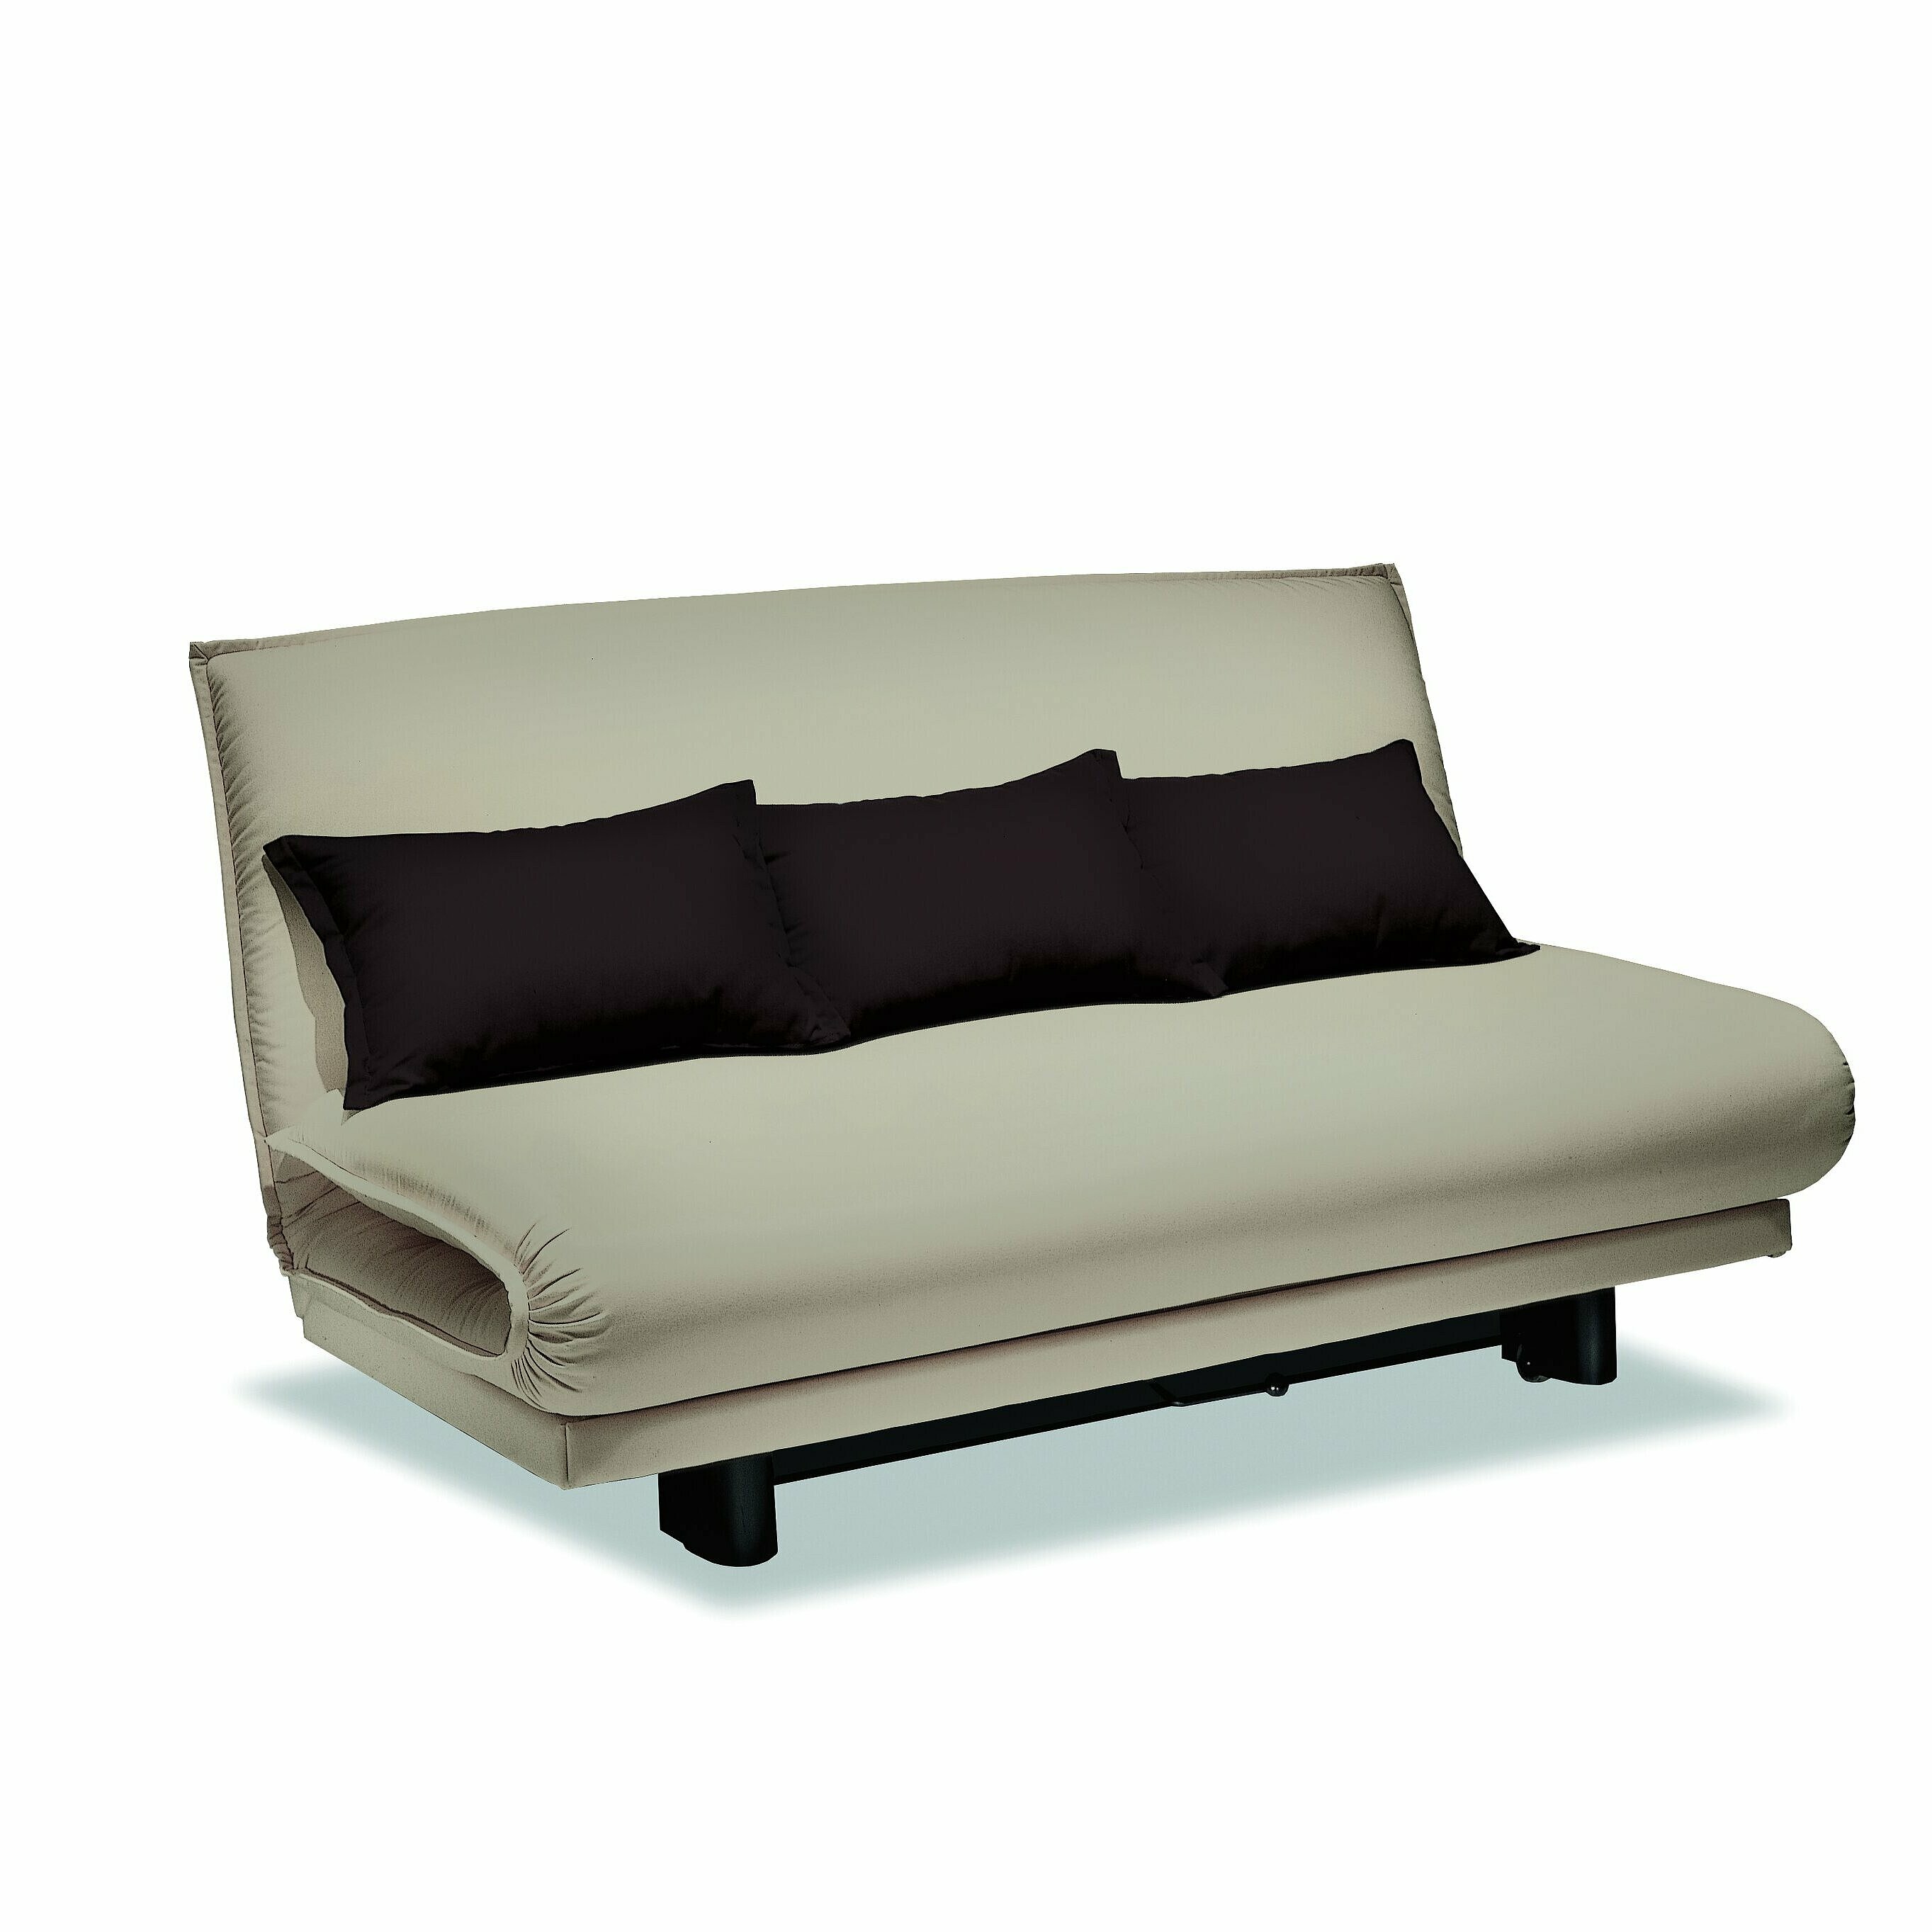 Colli sofa bed in a beige fabric and three matching pillows